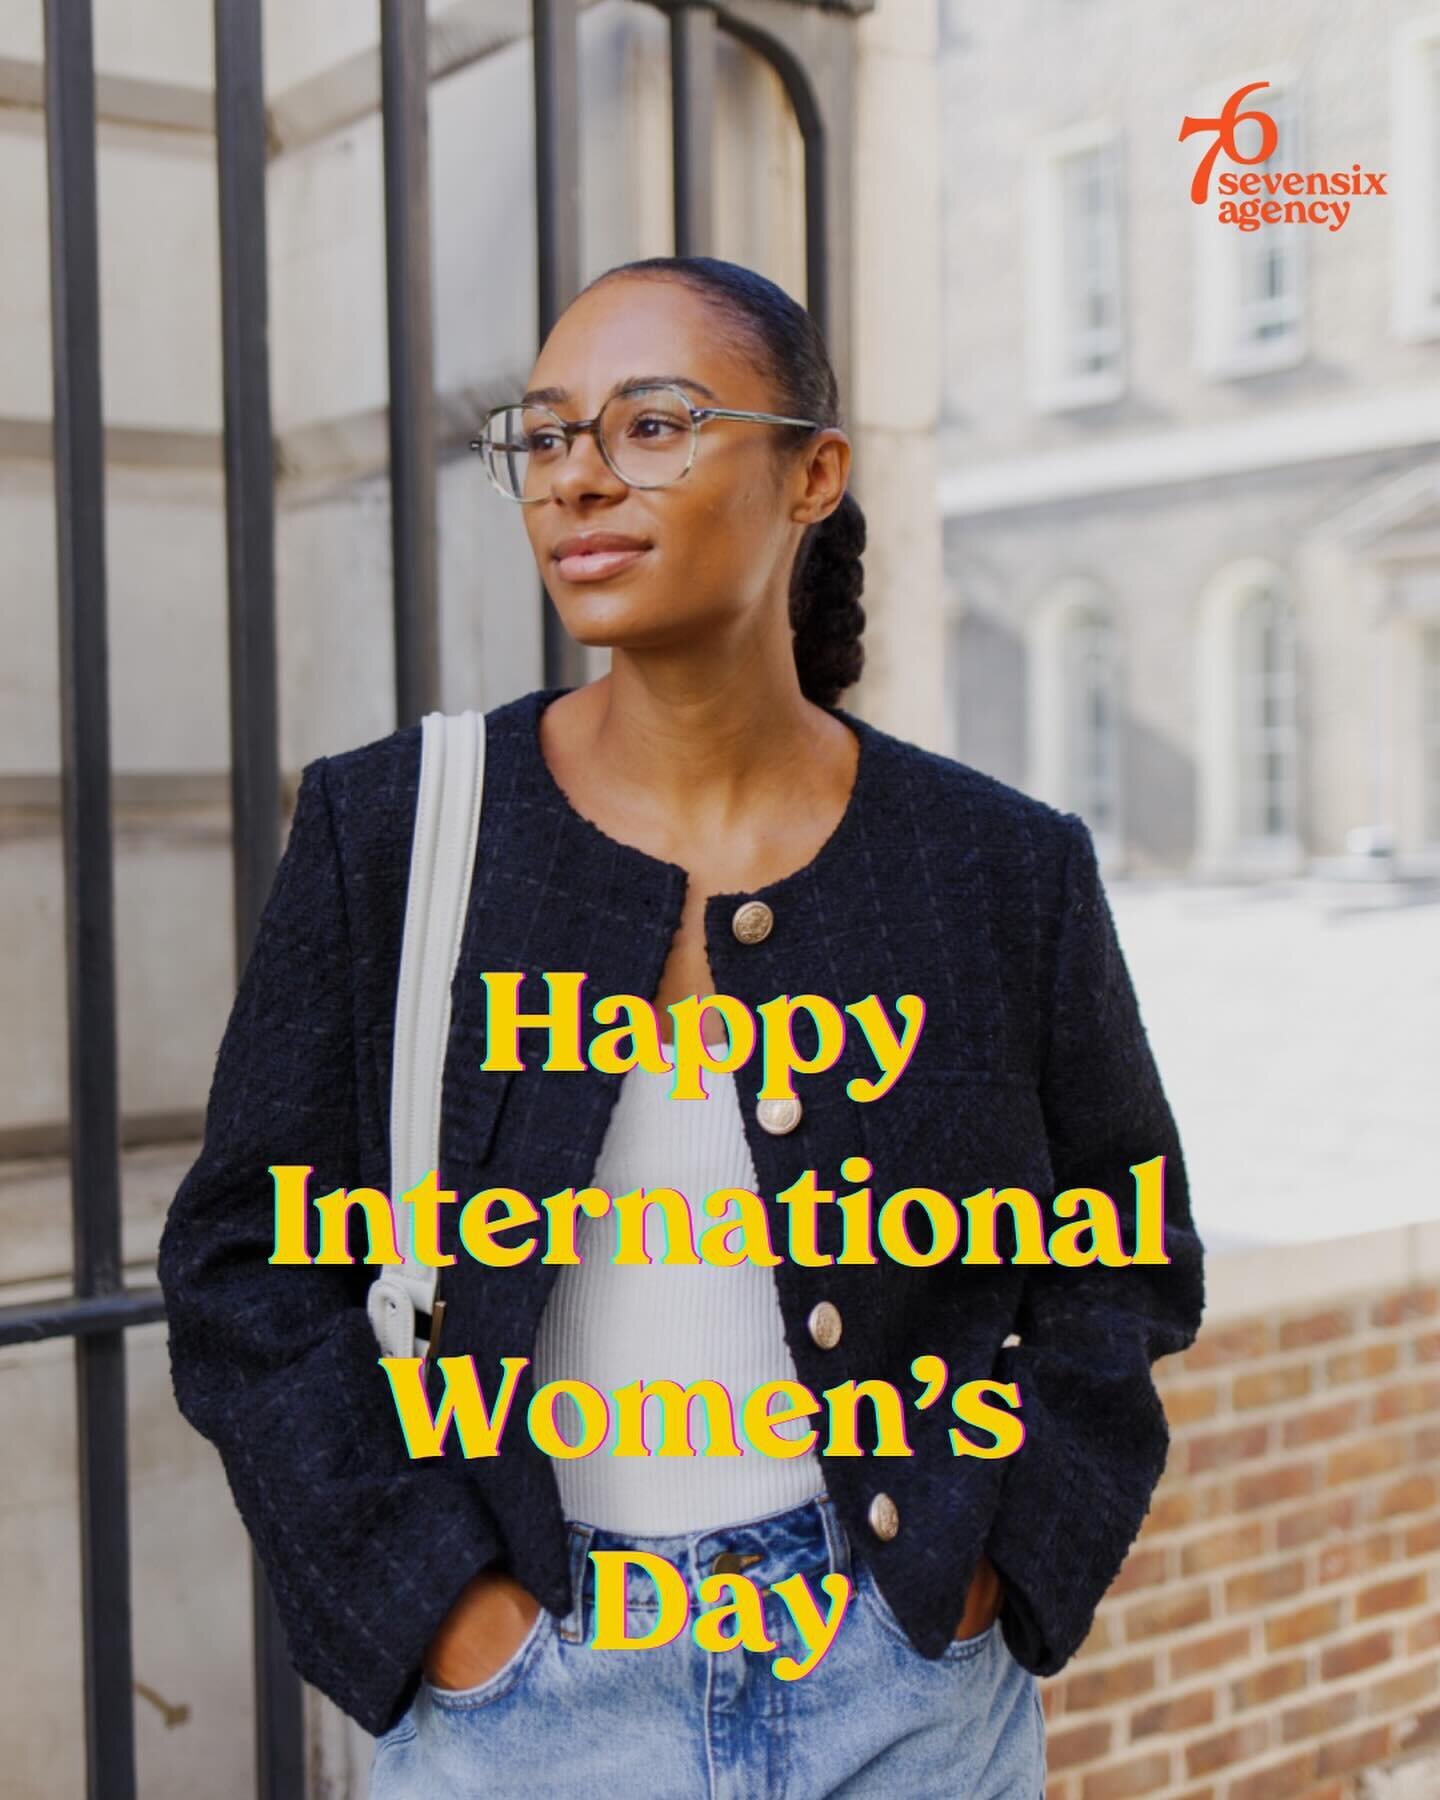 Celebrating International Women&rsquo;s Day with immense pride and inspiration! In an industry where 84% are women, our agency stands tall, championing the talented roster we look after. Today, we honour the remarkable women across the globe who lead